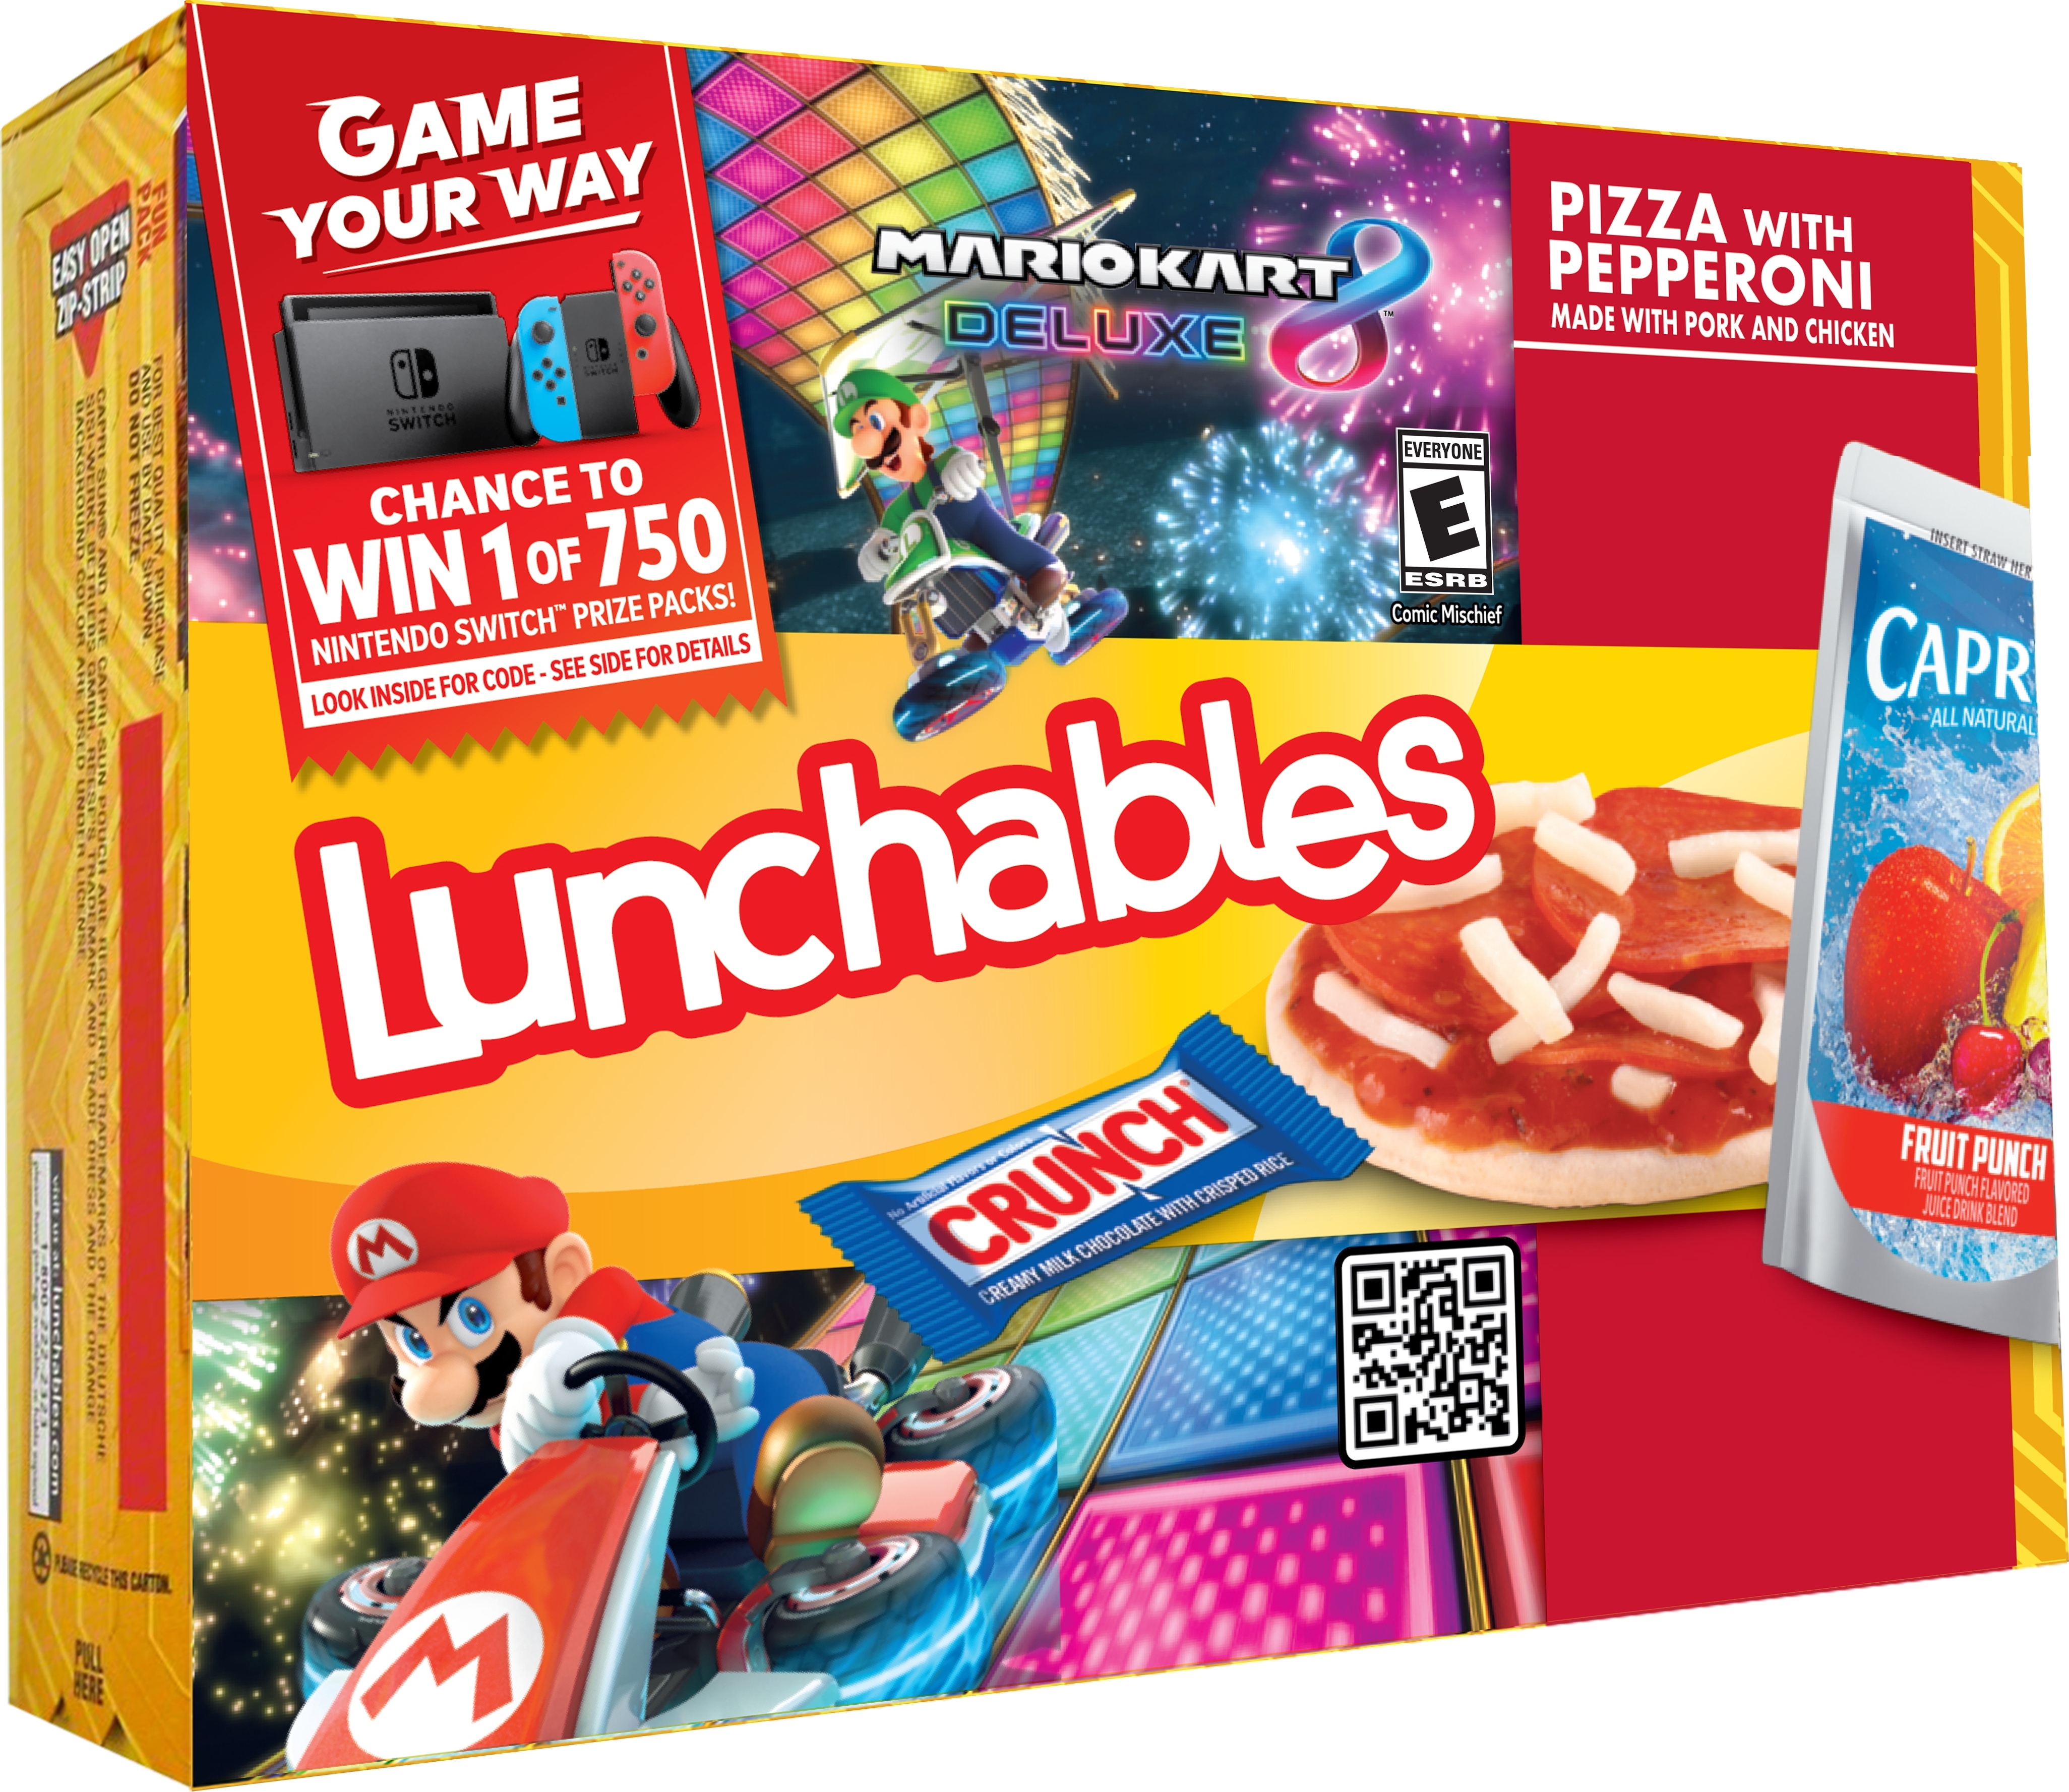 Game Your Way With Lunchables This Back-to-School Season.